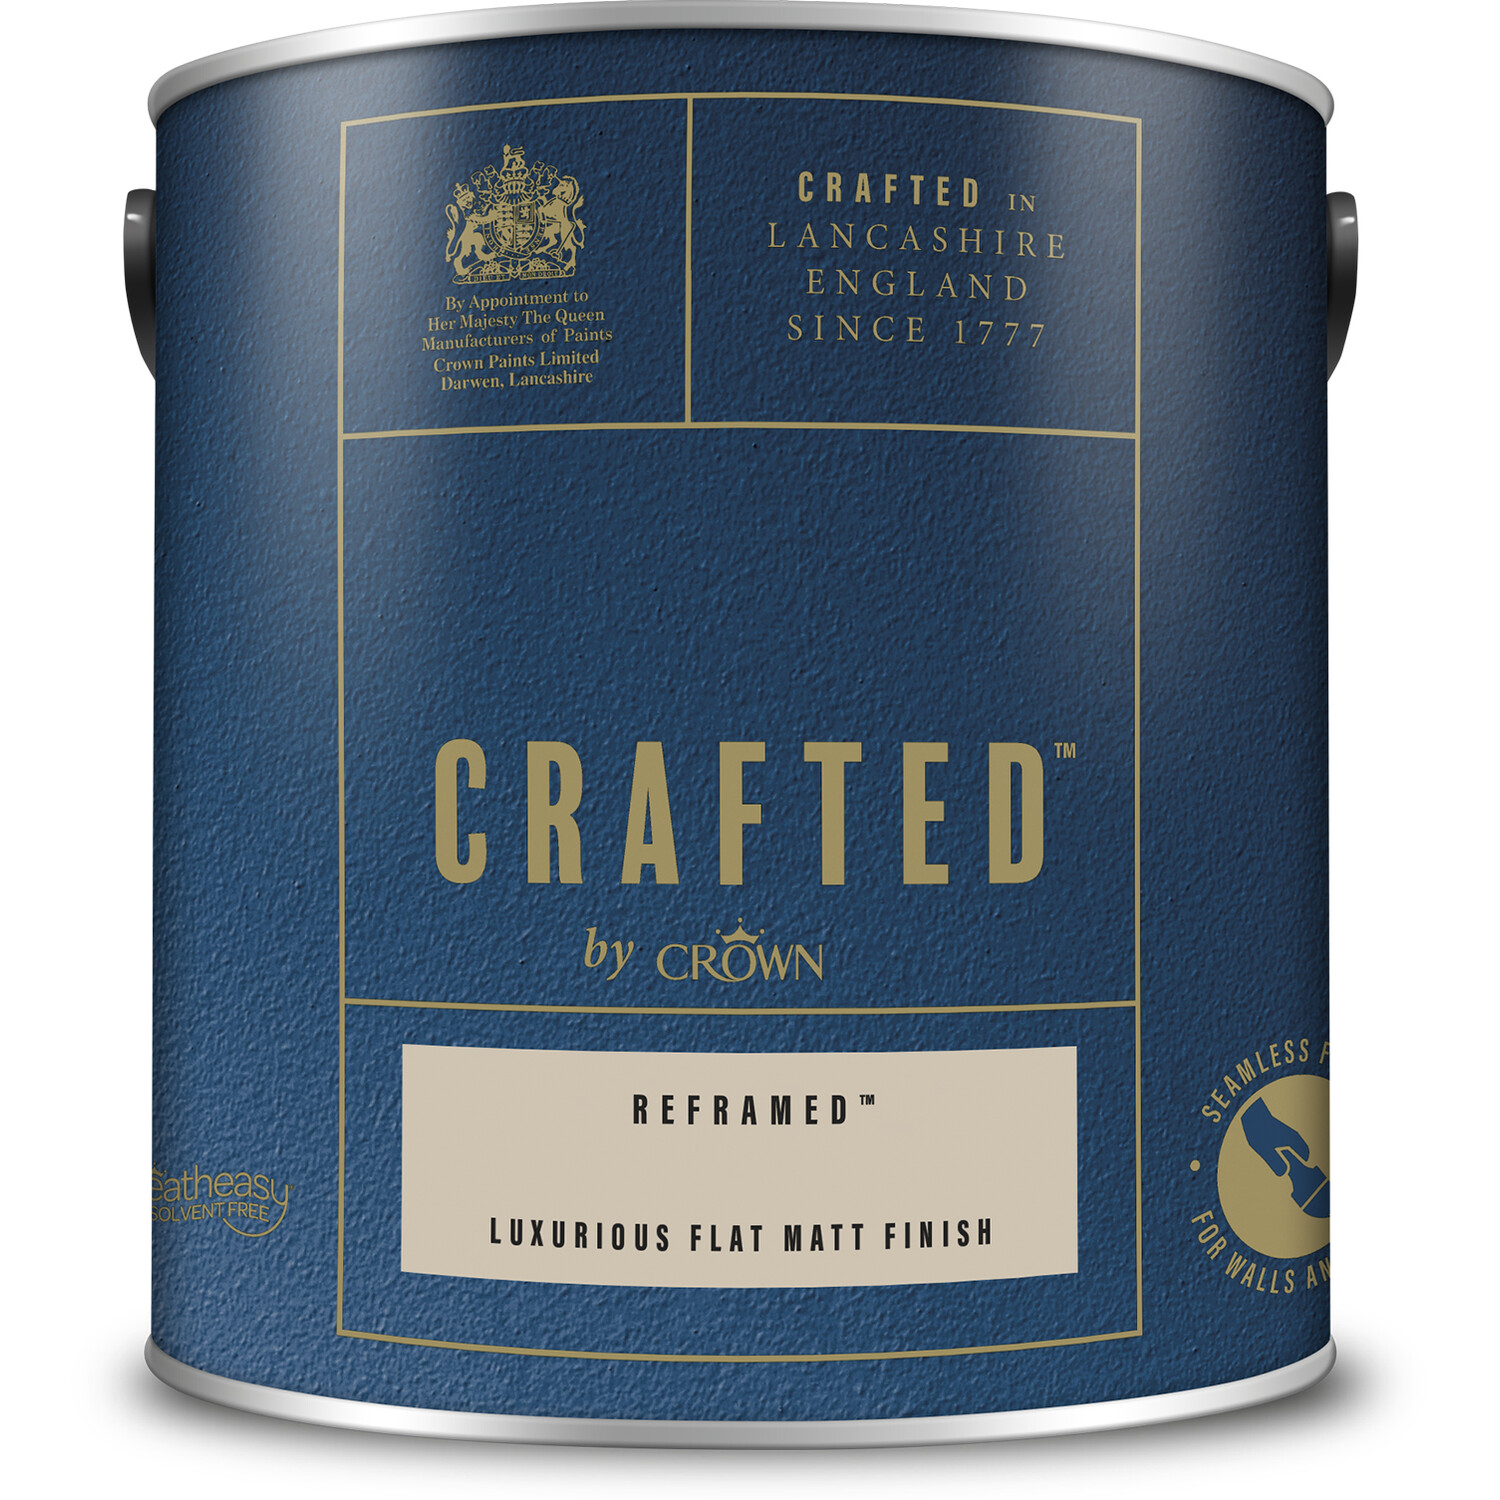 Crown Crafted Walls and Wood Reframed Luxurious Flat Matt Paint 2.5L Image 2